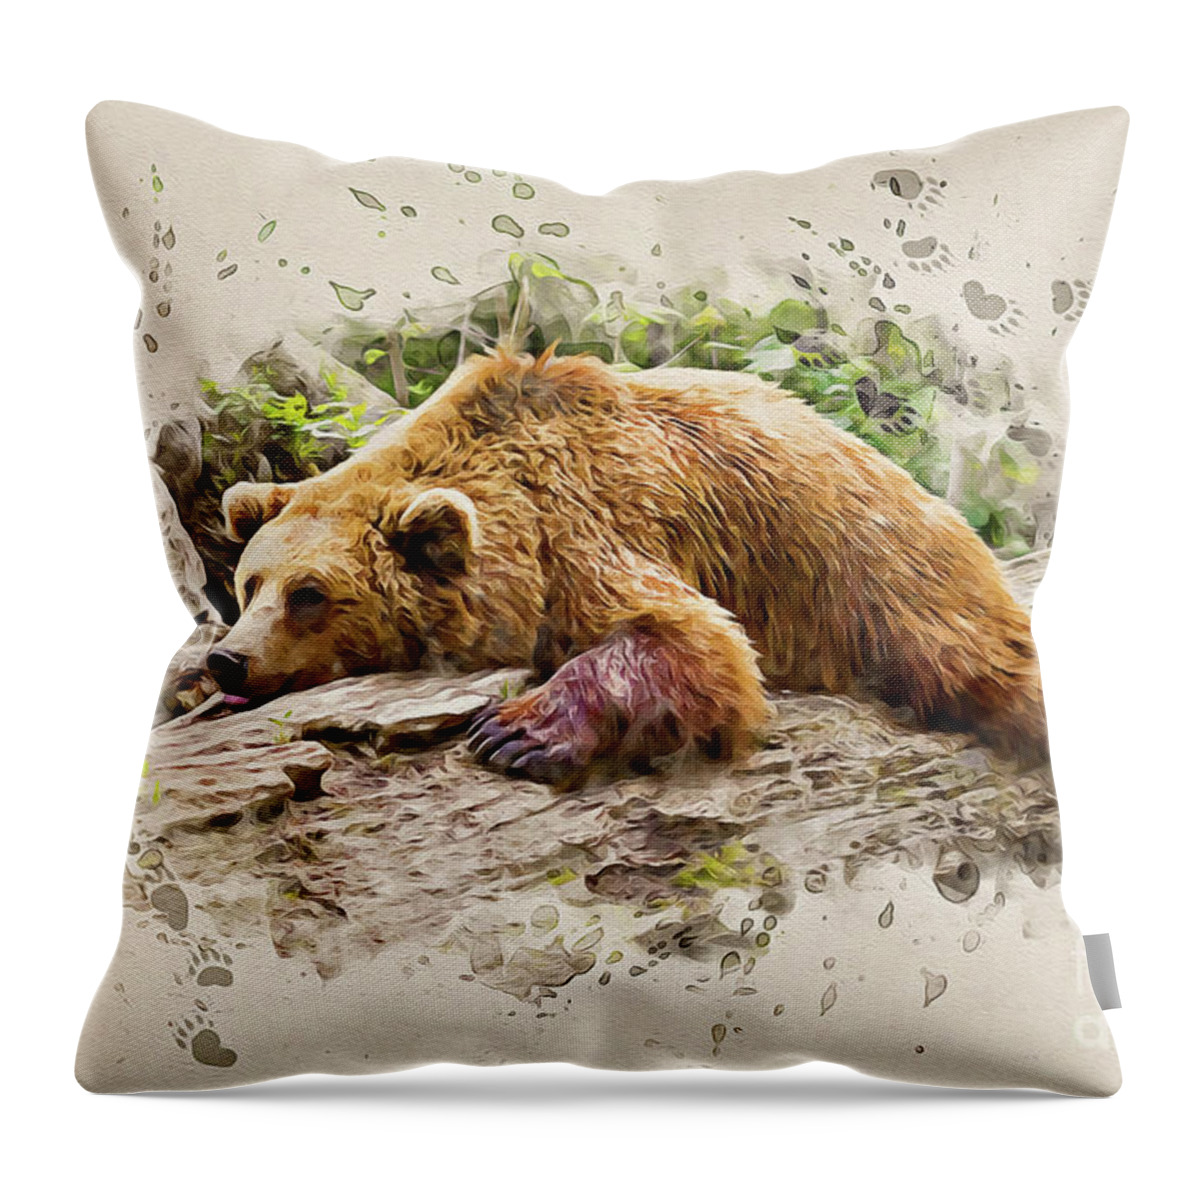 Bear Throw Pillow featuring the painting Bearly There by Denise Dundon